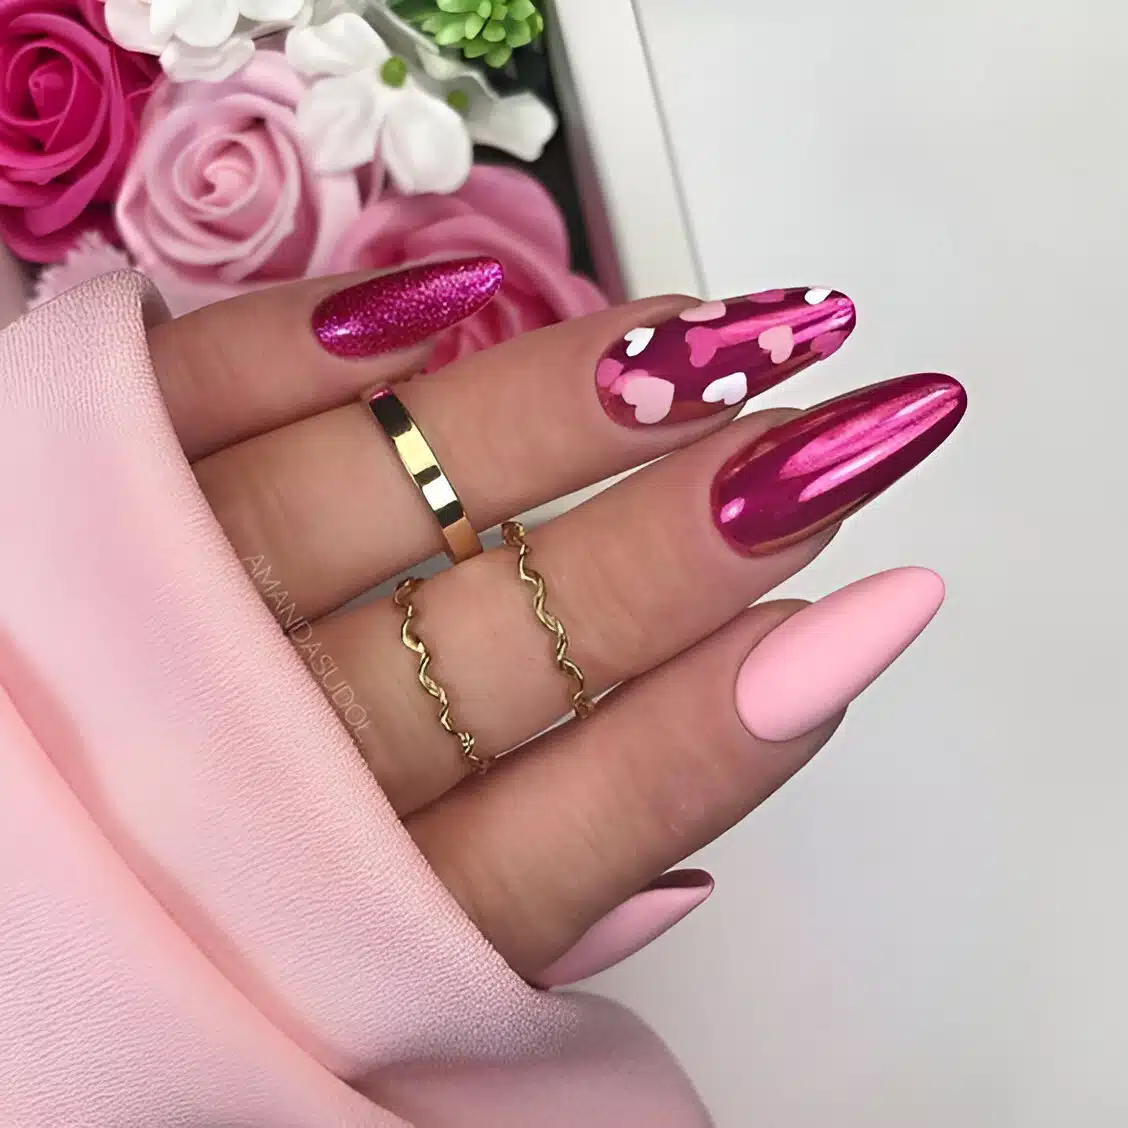 40 Gorgeous Heart Manicures Romantic Ladies Need To Copy ASAP 22